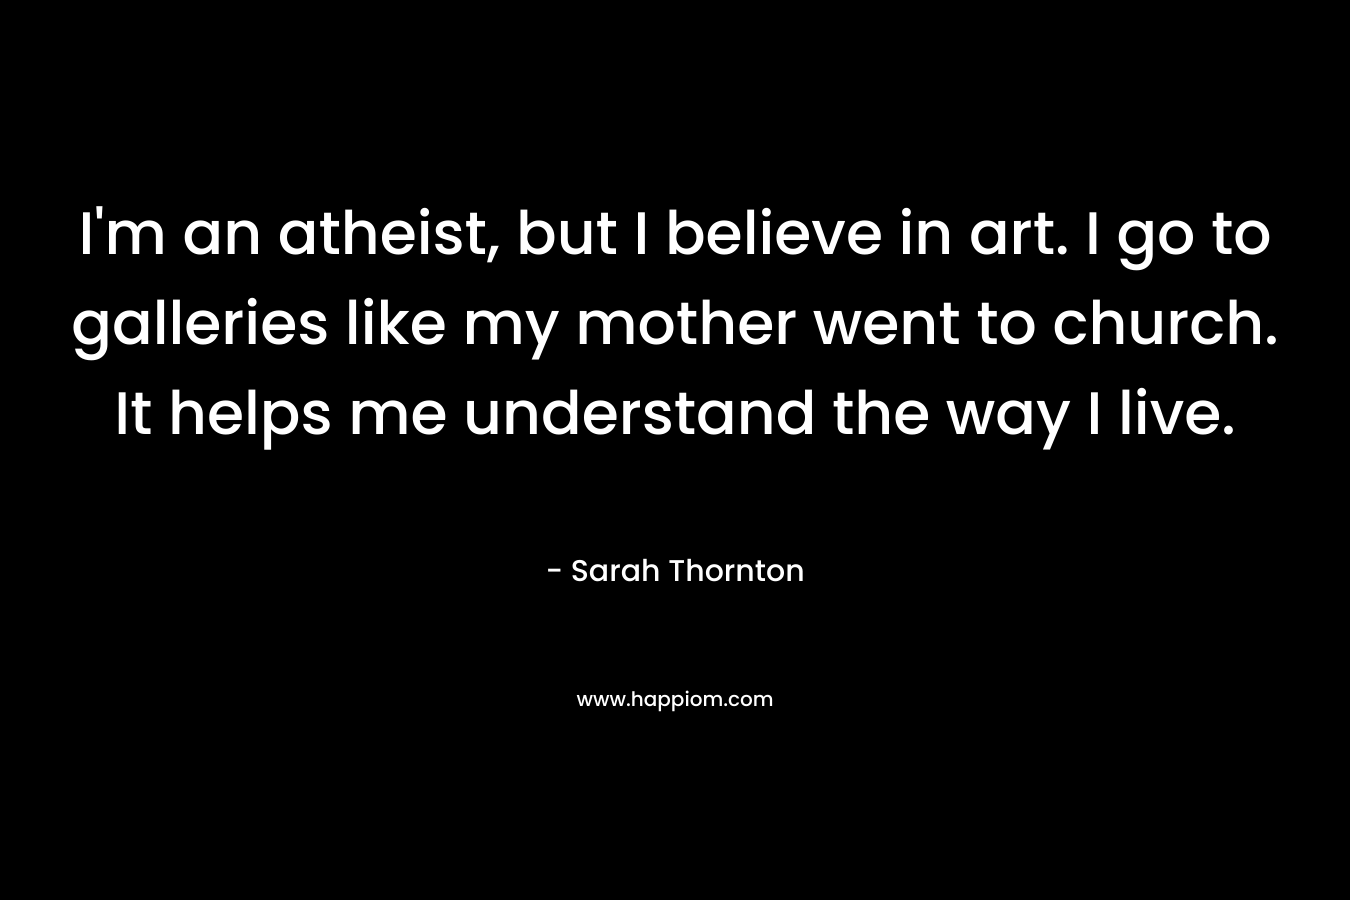 I’m an atheist, but I believe in art. I go to galleries like my mother went to church. It helps me understand the way I live. – Sarah Thornton